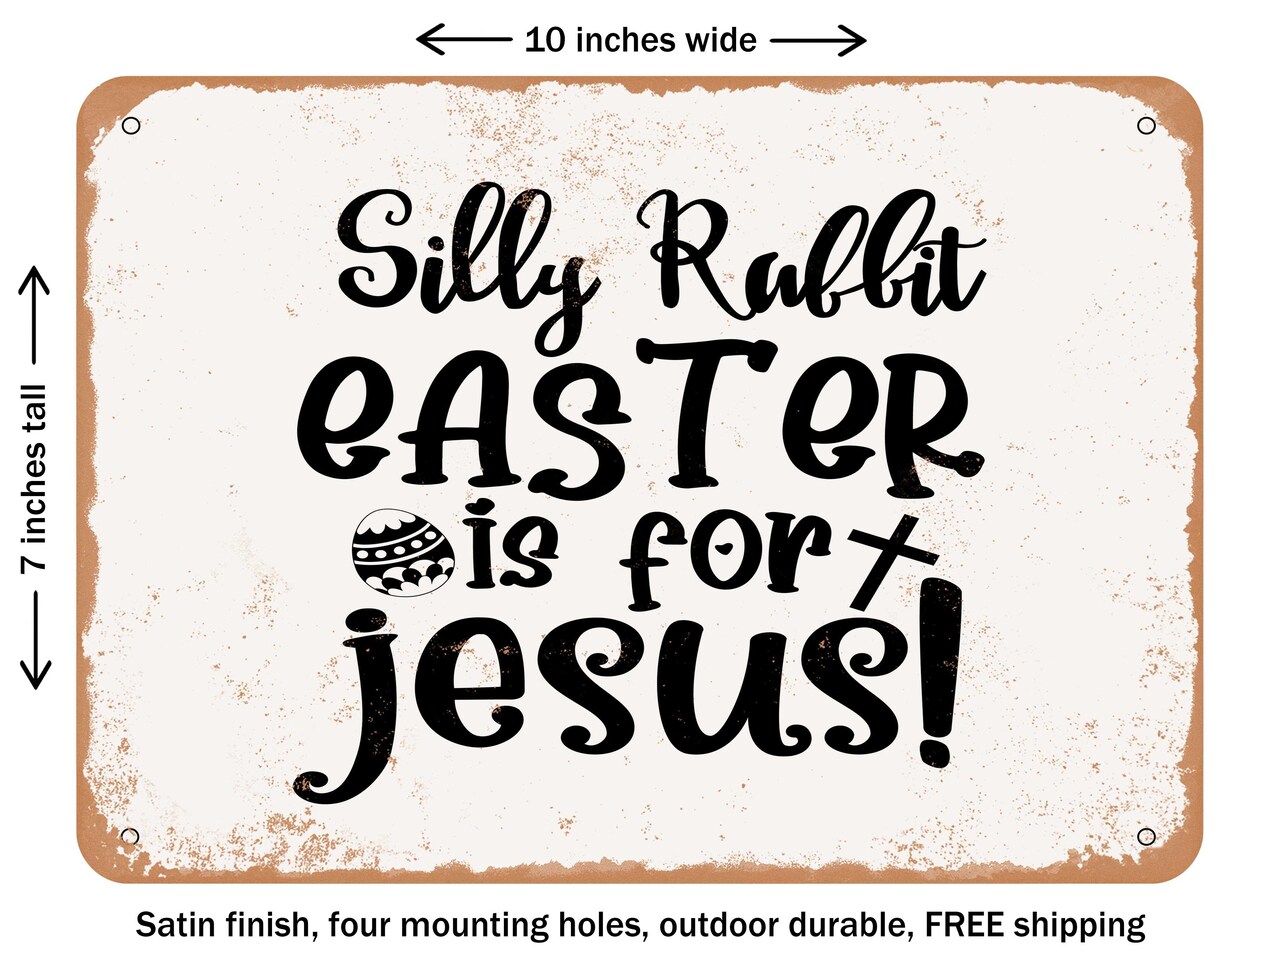 DECORATIVE METAL SIGN - Silly Rabbit Easter is For Jesus - 2 - Vintage Rusty Look